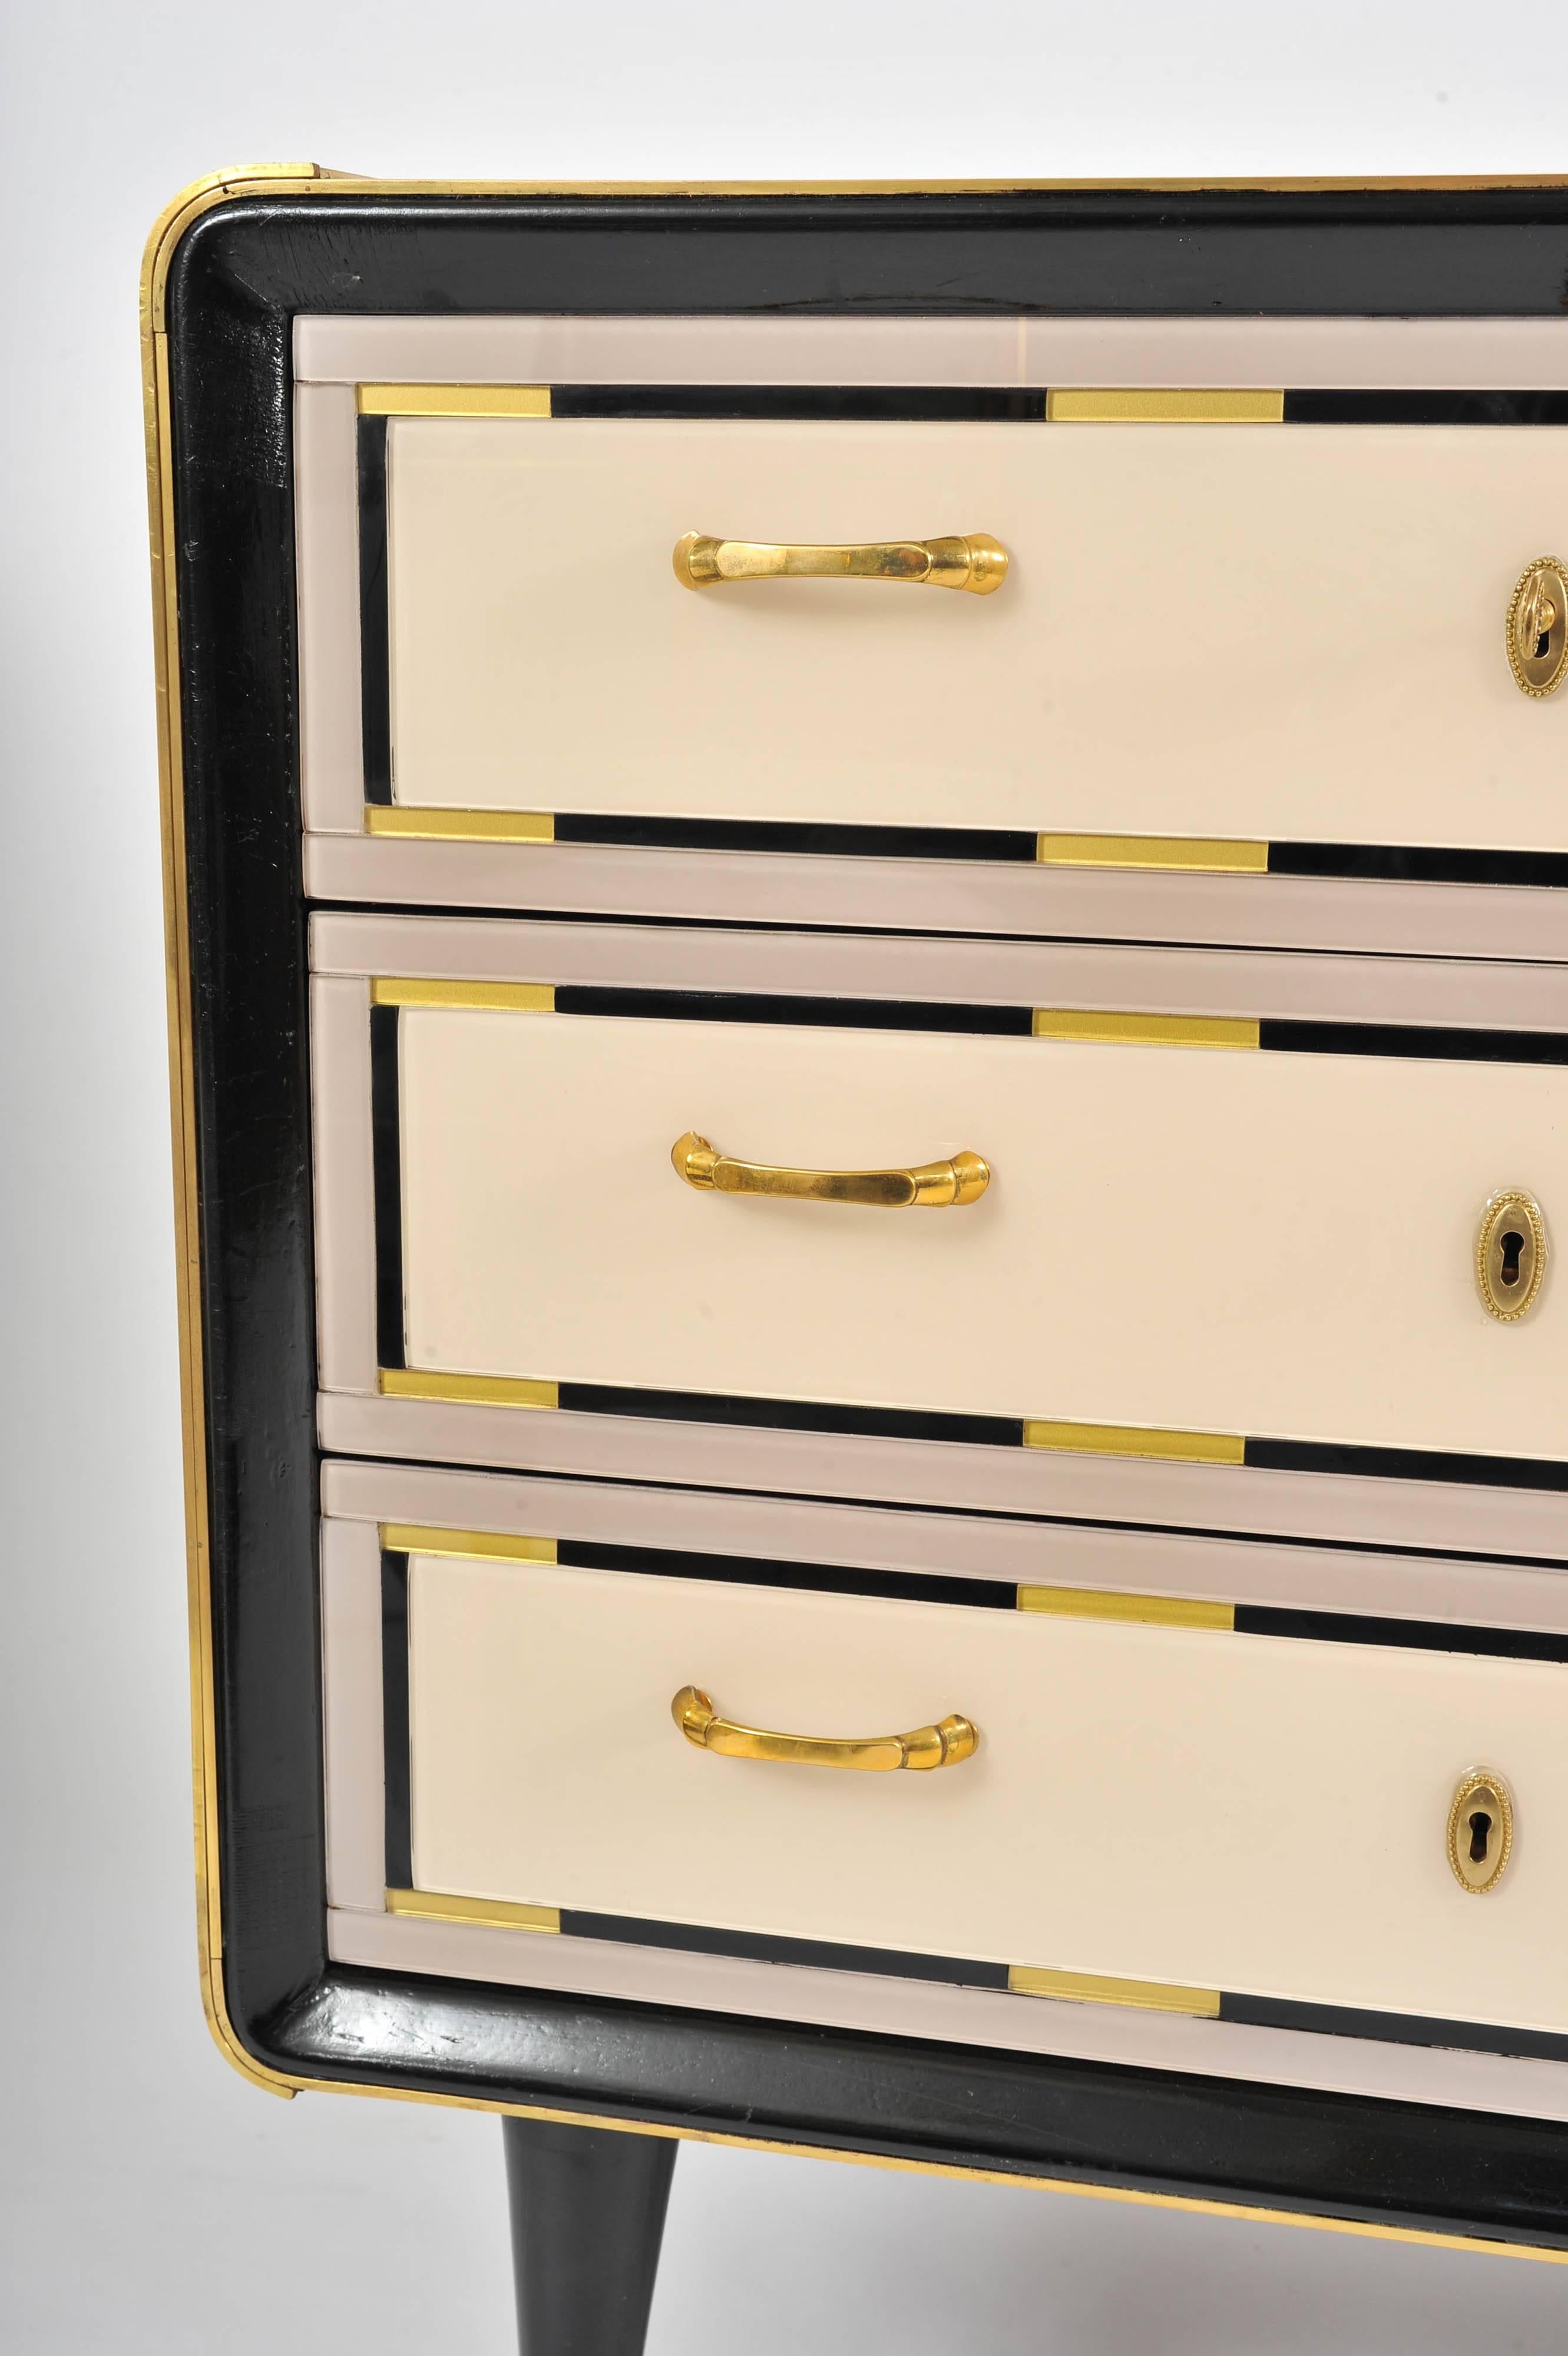 Subtle combination of cream glass drawers all with dusty pink surround and black and gold details. Black glass top with curved corners. Brass handles and sabots on turned wooden legs.